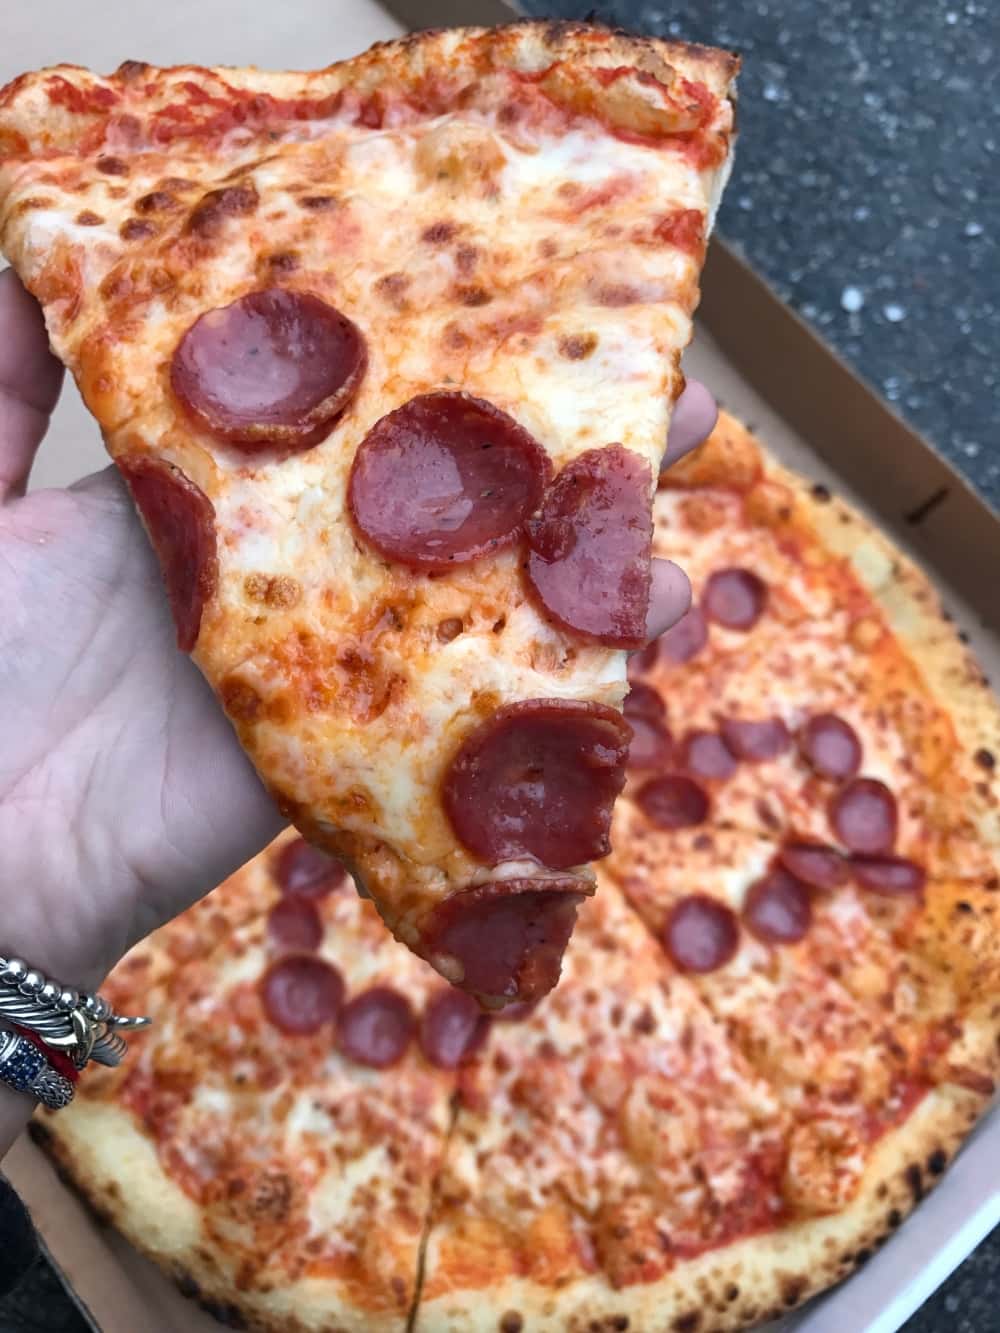 Pizza Photo Taken from @Everything_Delish Instagram with iPhone 7 plus